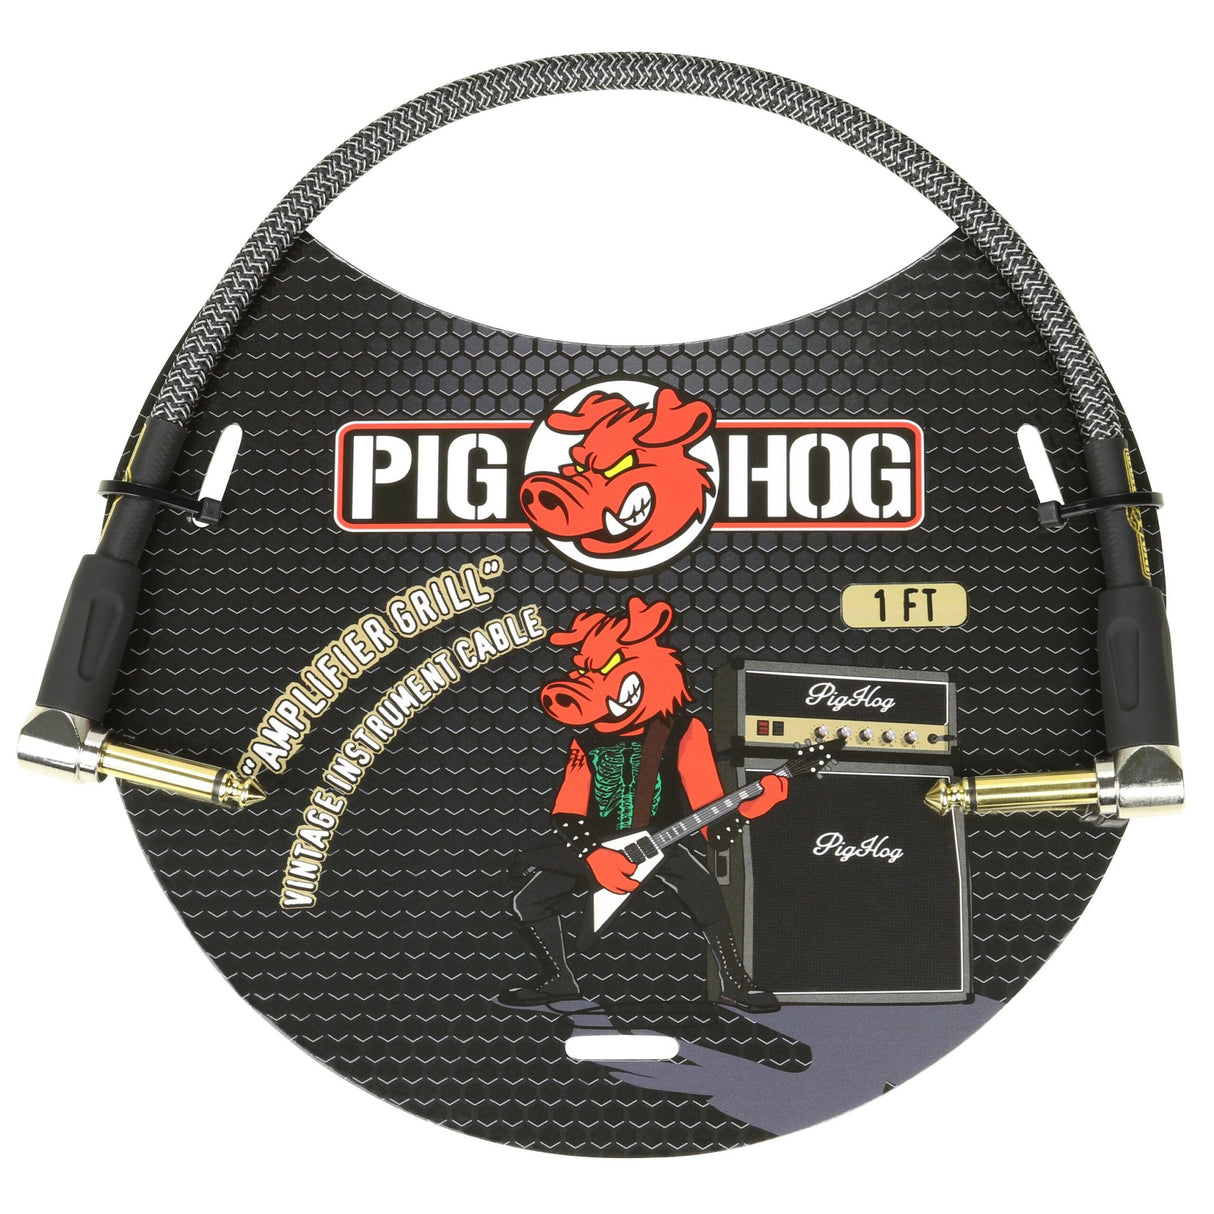 Pig Hog PCH1AGR "Amplifier Grill" 1ft Right Angled Patch Cables